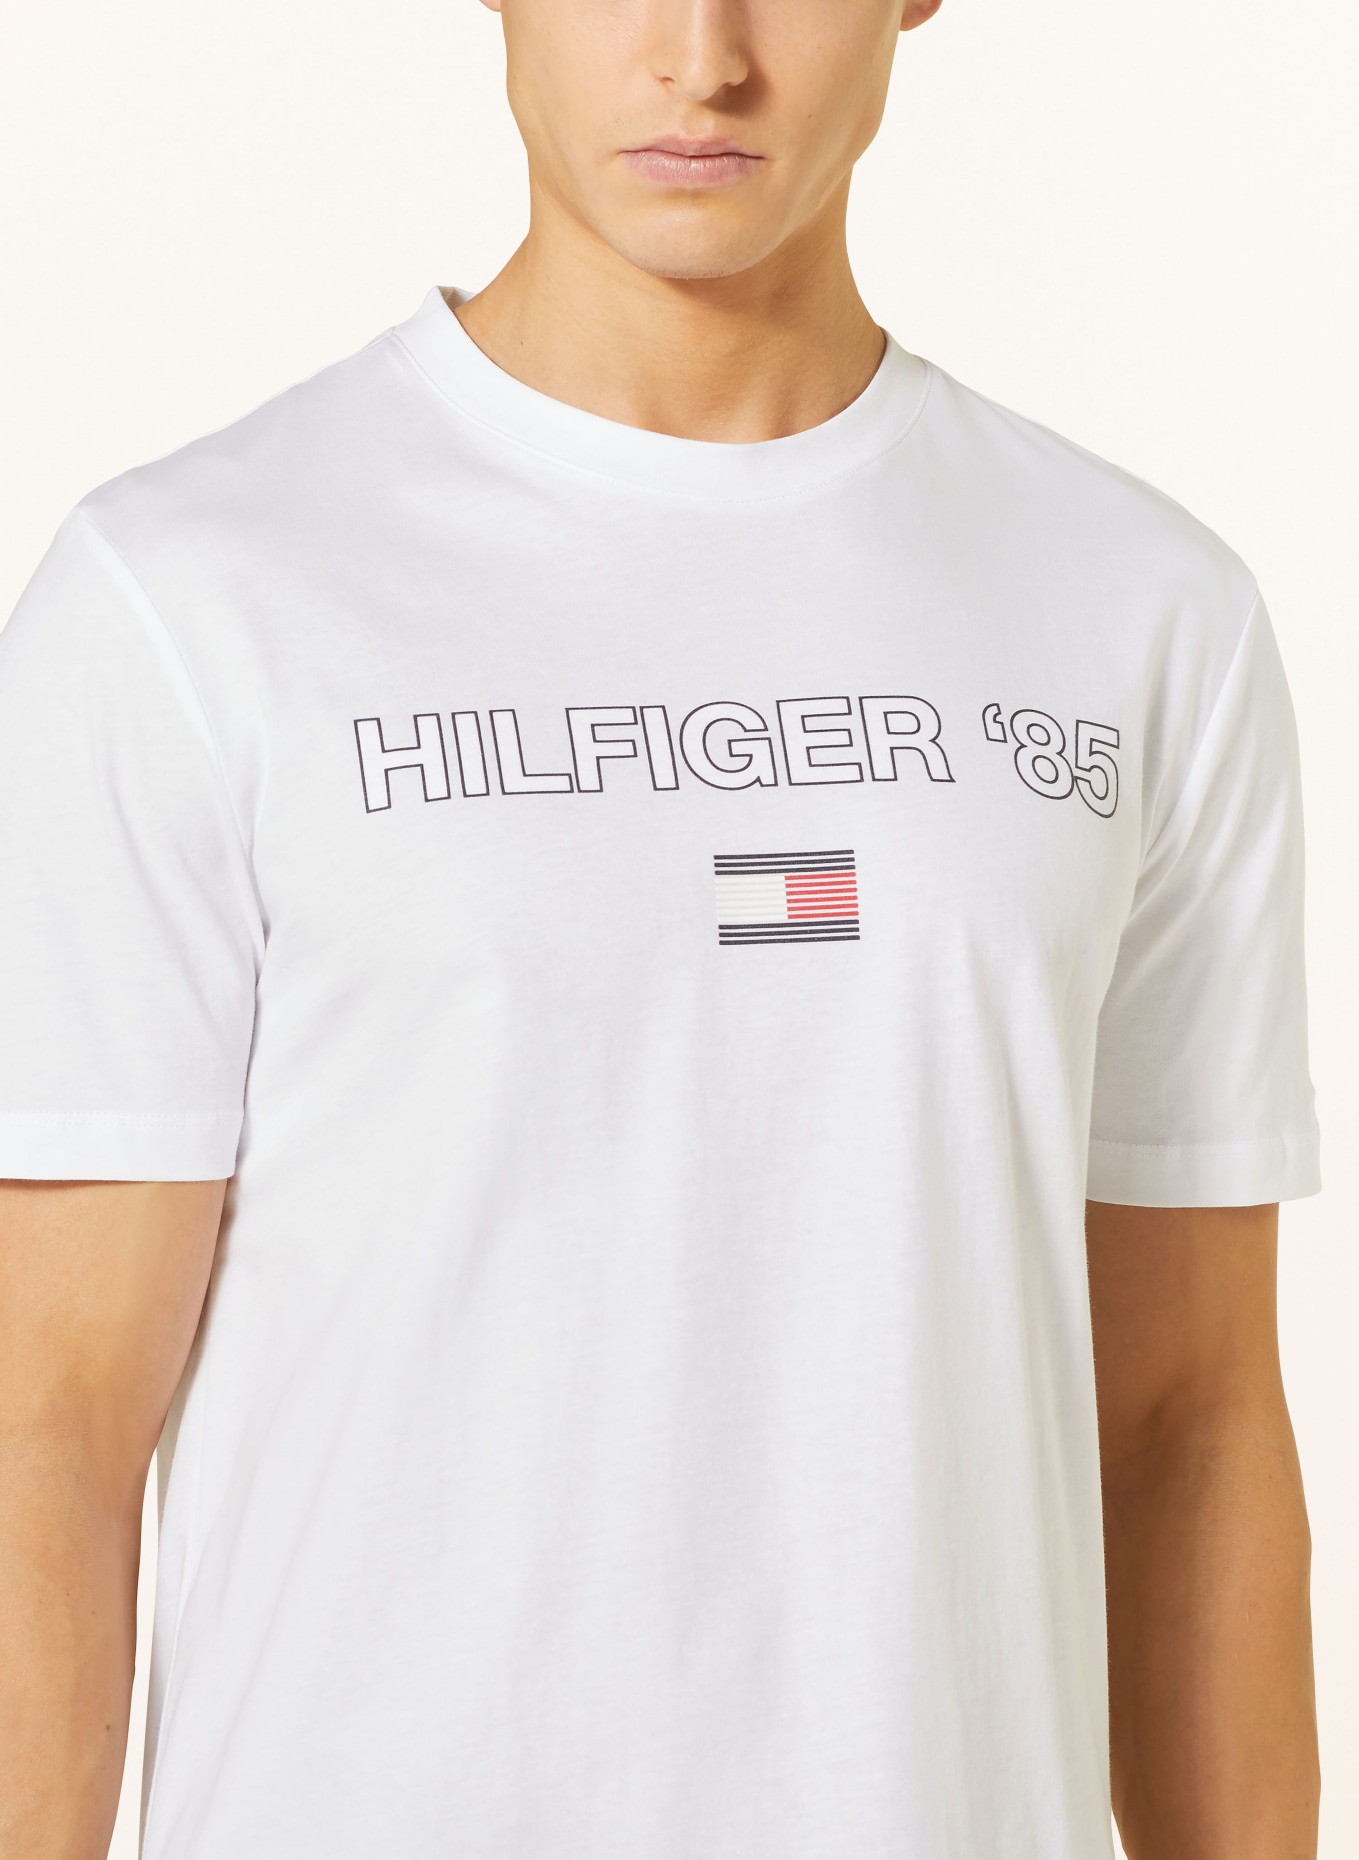 TOMMY HILFIGER T-shirt in white